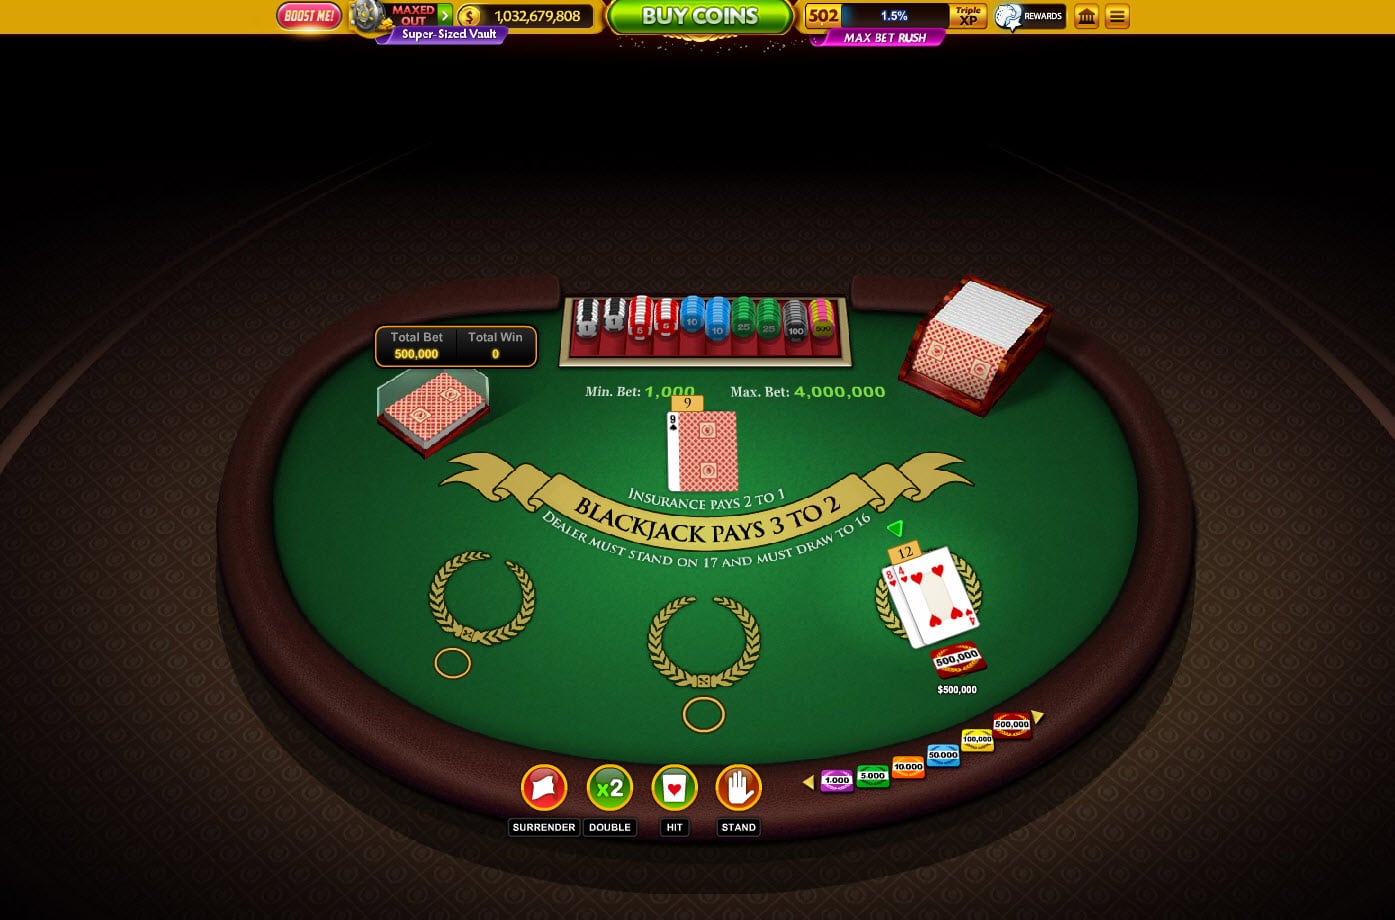 hollywood casino games are slow with mouse